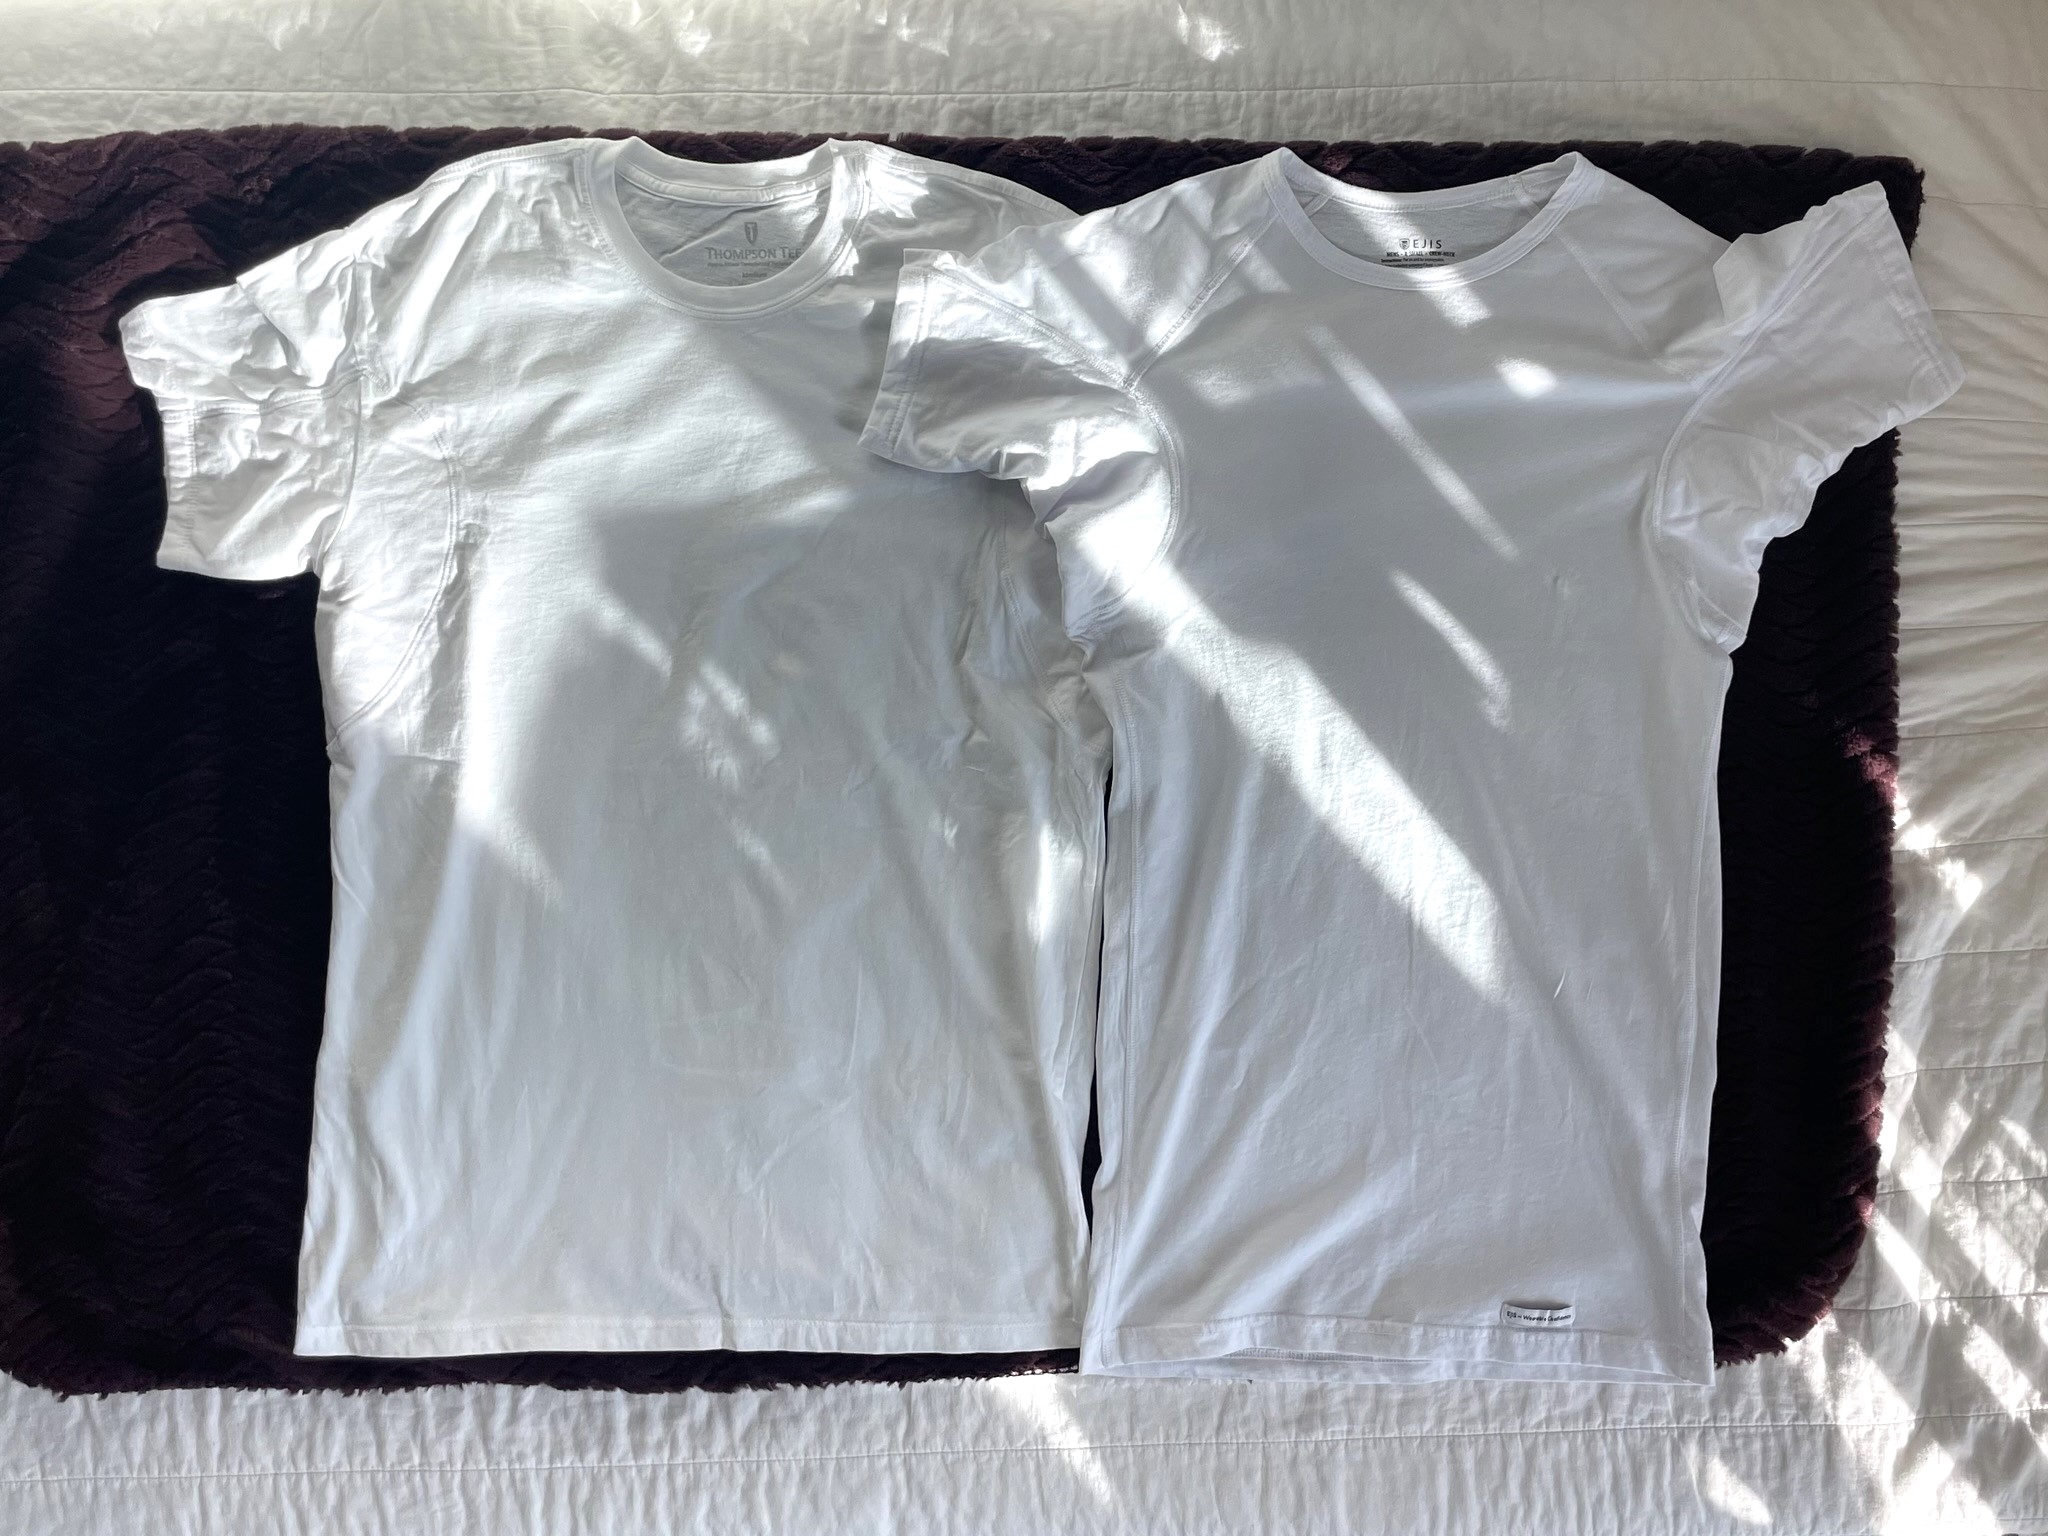 Pictured on the left is a medium size Thompson Tee vs an extra small size Ejis on the right. Despite the two-size difference, Ejis is still longer.